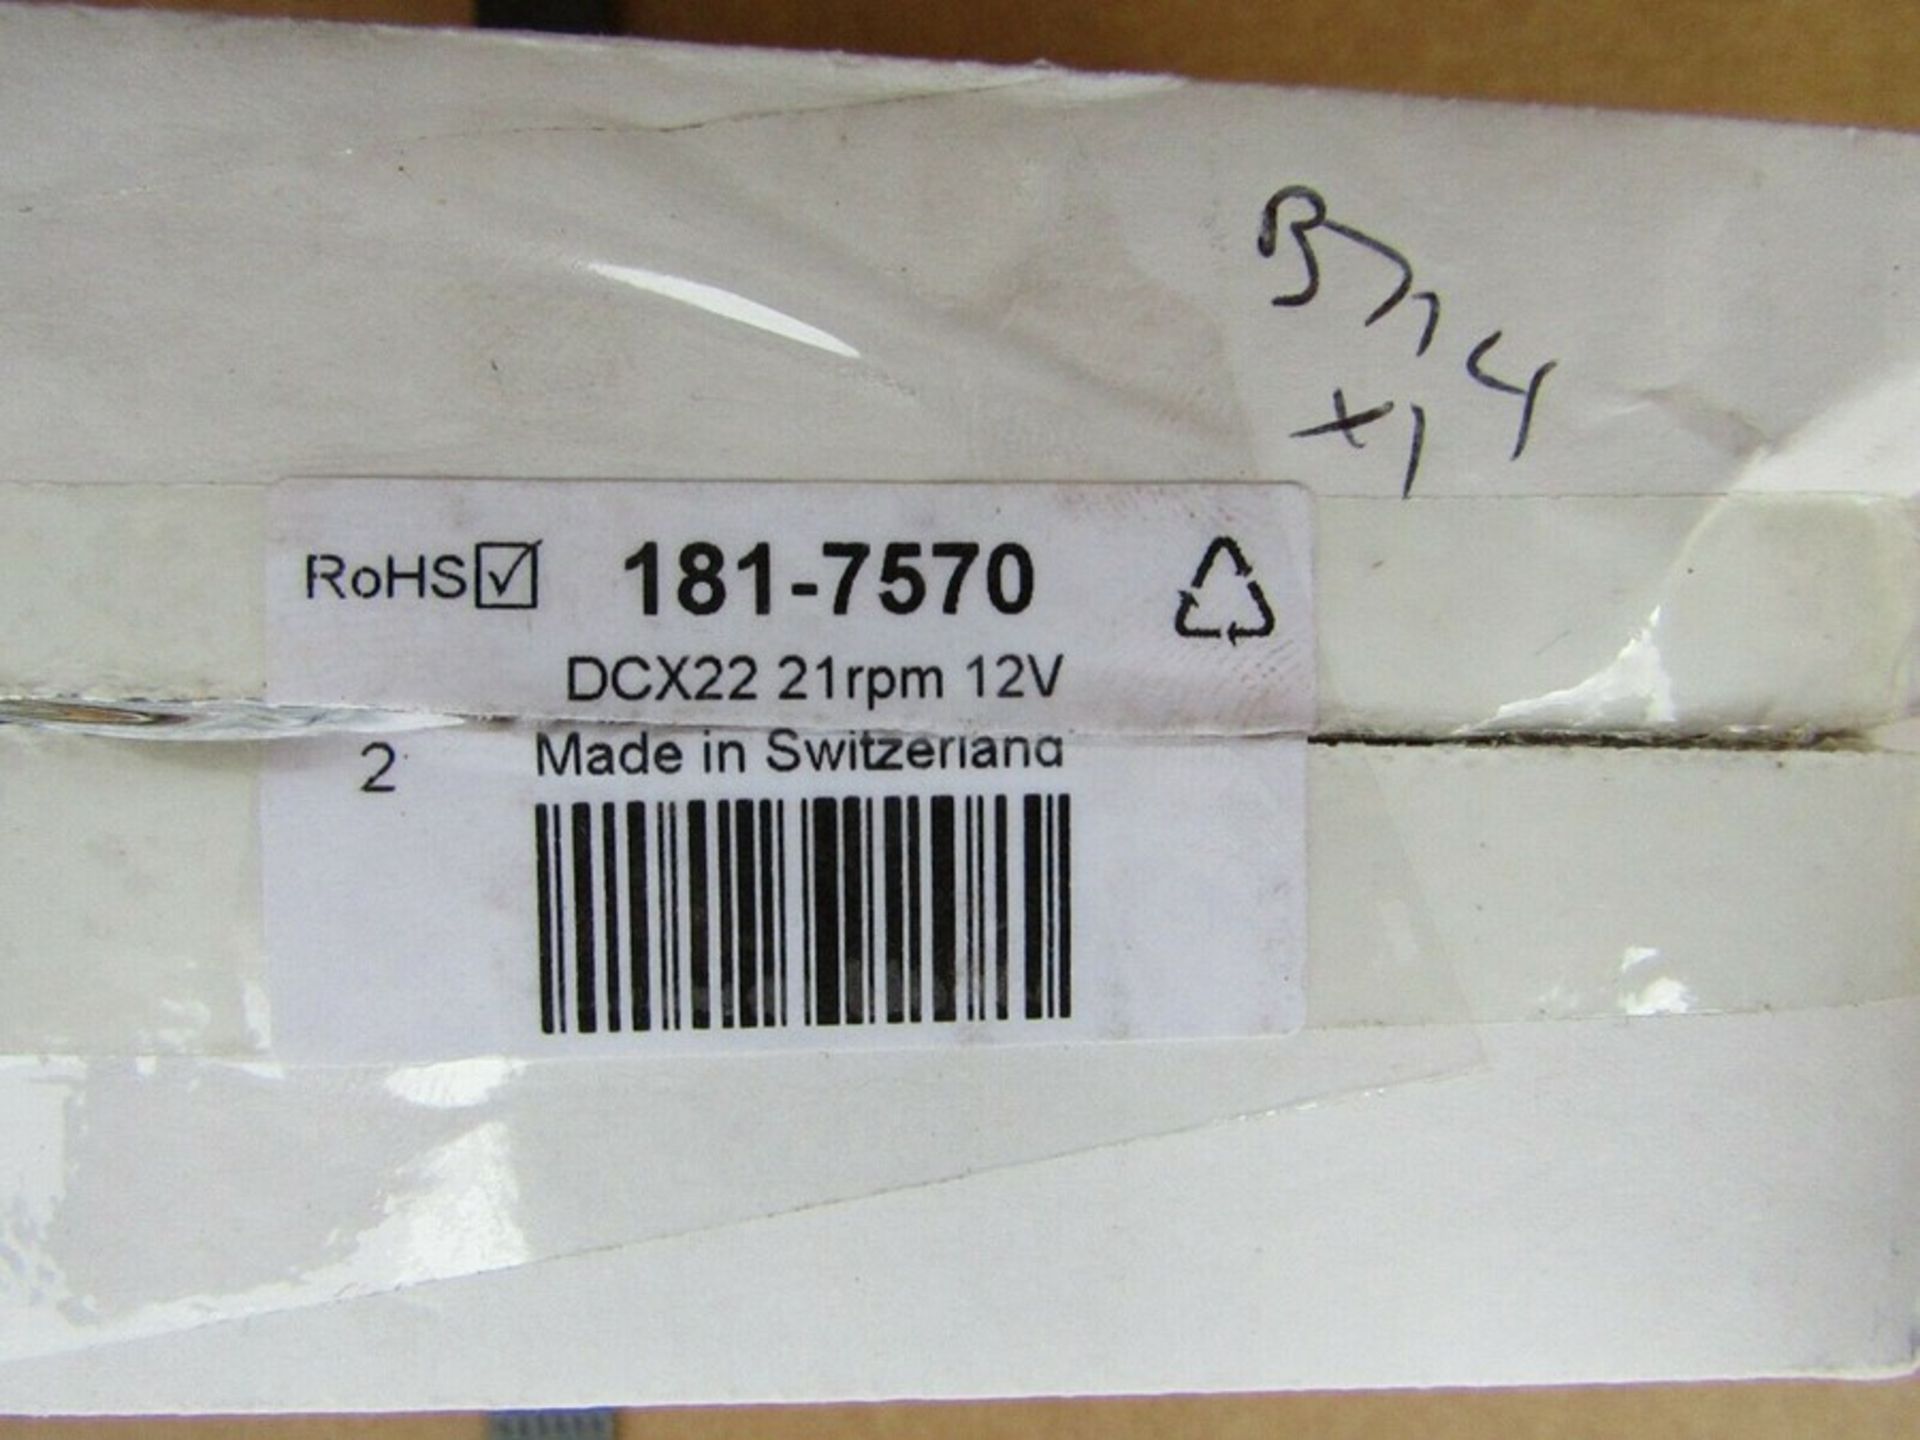 Maxon DCX 12Vdc 2Nm Brushed DC Geared Motor Output Speed 5260 rpm B714 1817570 - Image 2 of 2